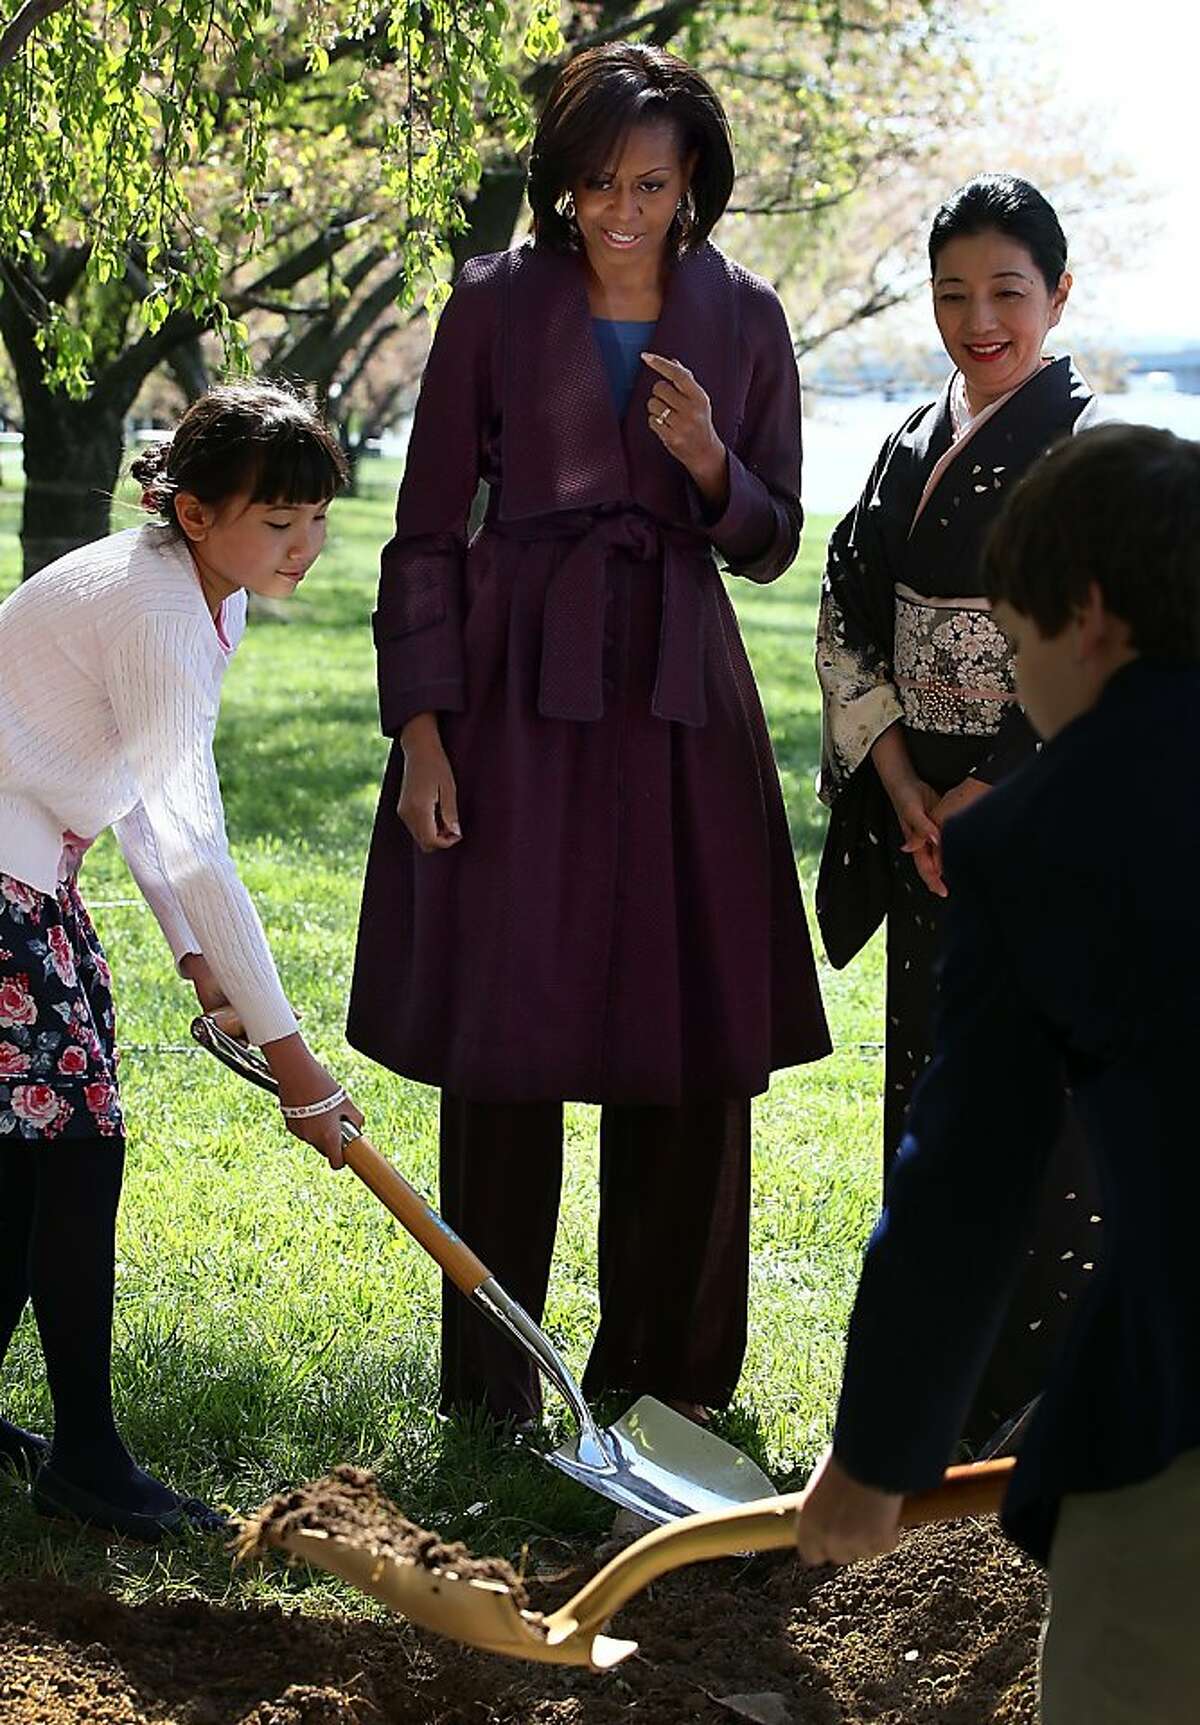 U.S. first lady Michelle Obama (C) takes part in a 1912 Cherry Blossom tree planting re-enactment ceremony with Yoriko Fujisaki (R) near the Tidal Basin and along the Potomac River March 27, 2012 in Washington, DC. 2012 marks the 100th anniversary since the United States received 3,000 Cherry Blossom trees as a gift from Japan symbolizing the friendship between the two countries.